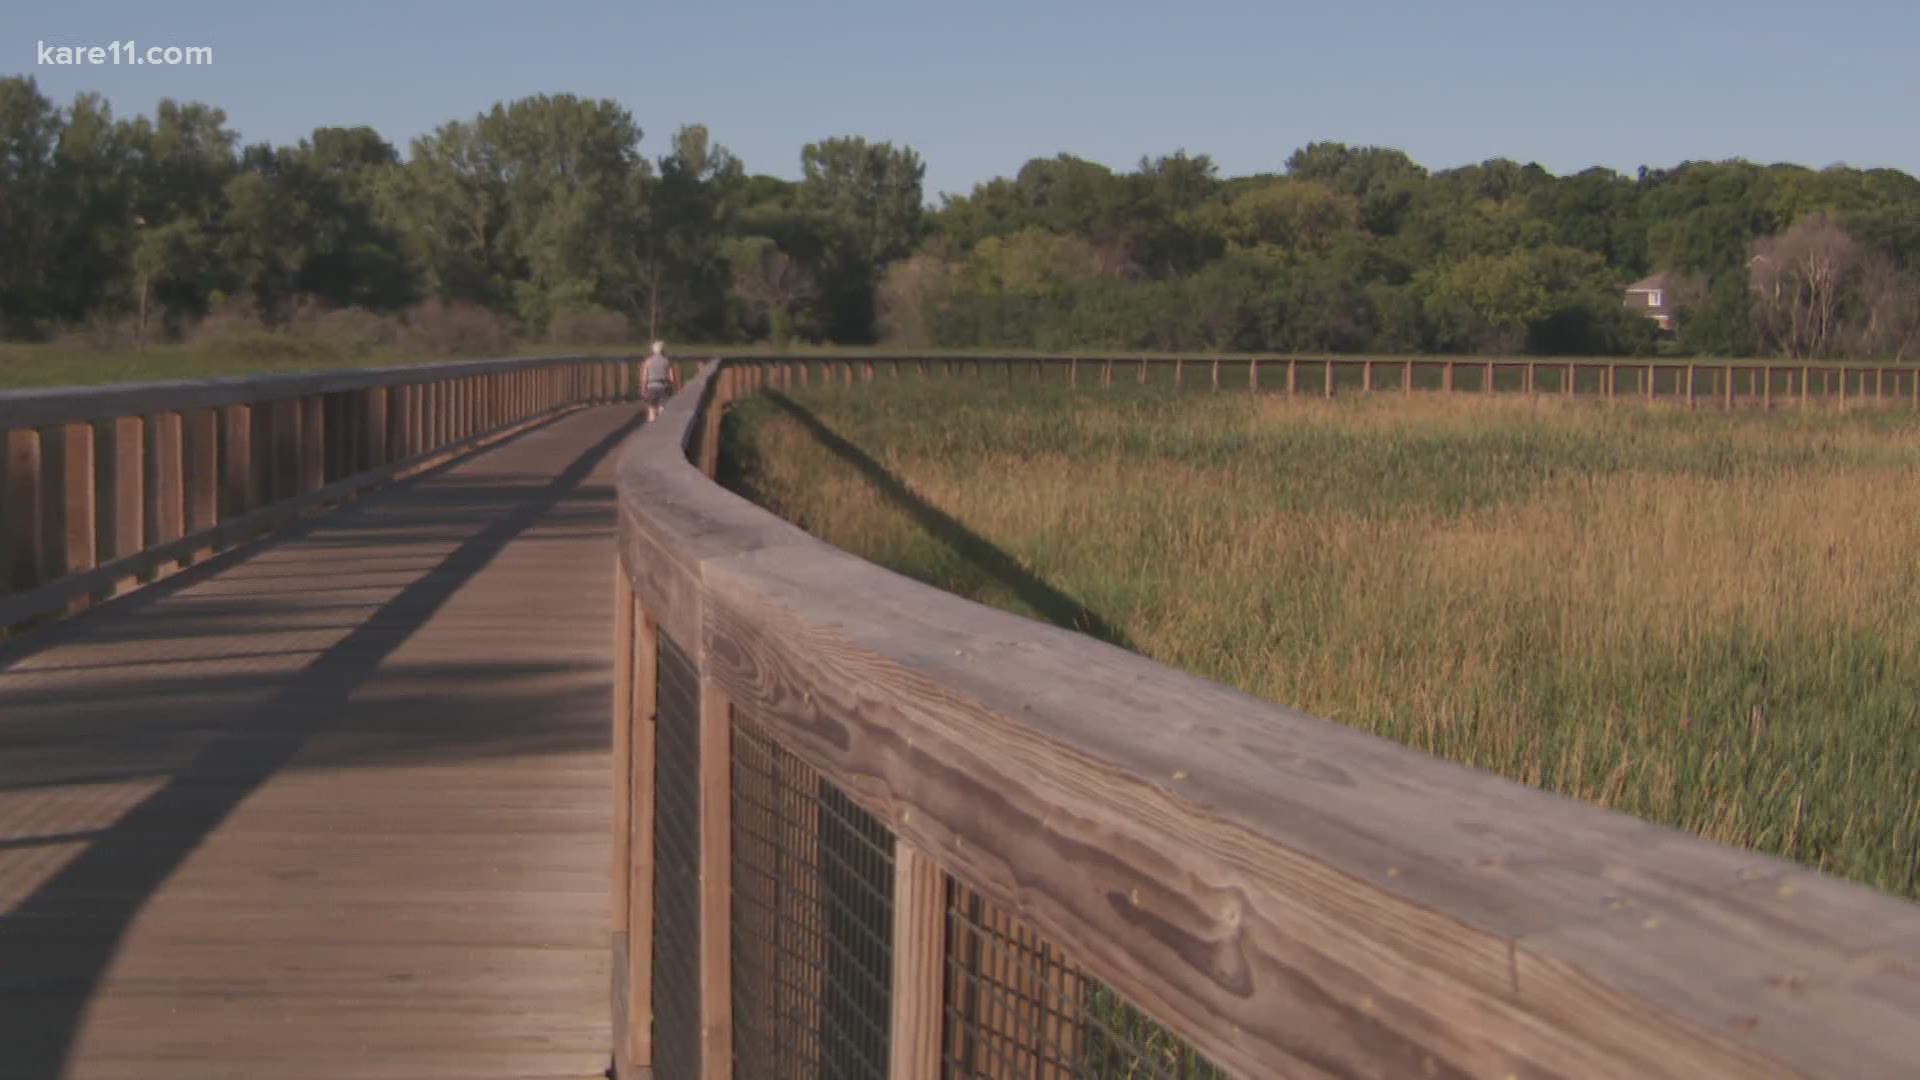 Parks and trails in the Three Rivers Park District are still open during the coronavirus pandemic.